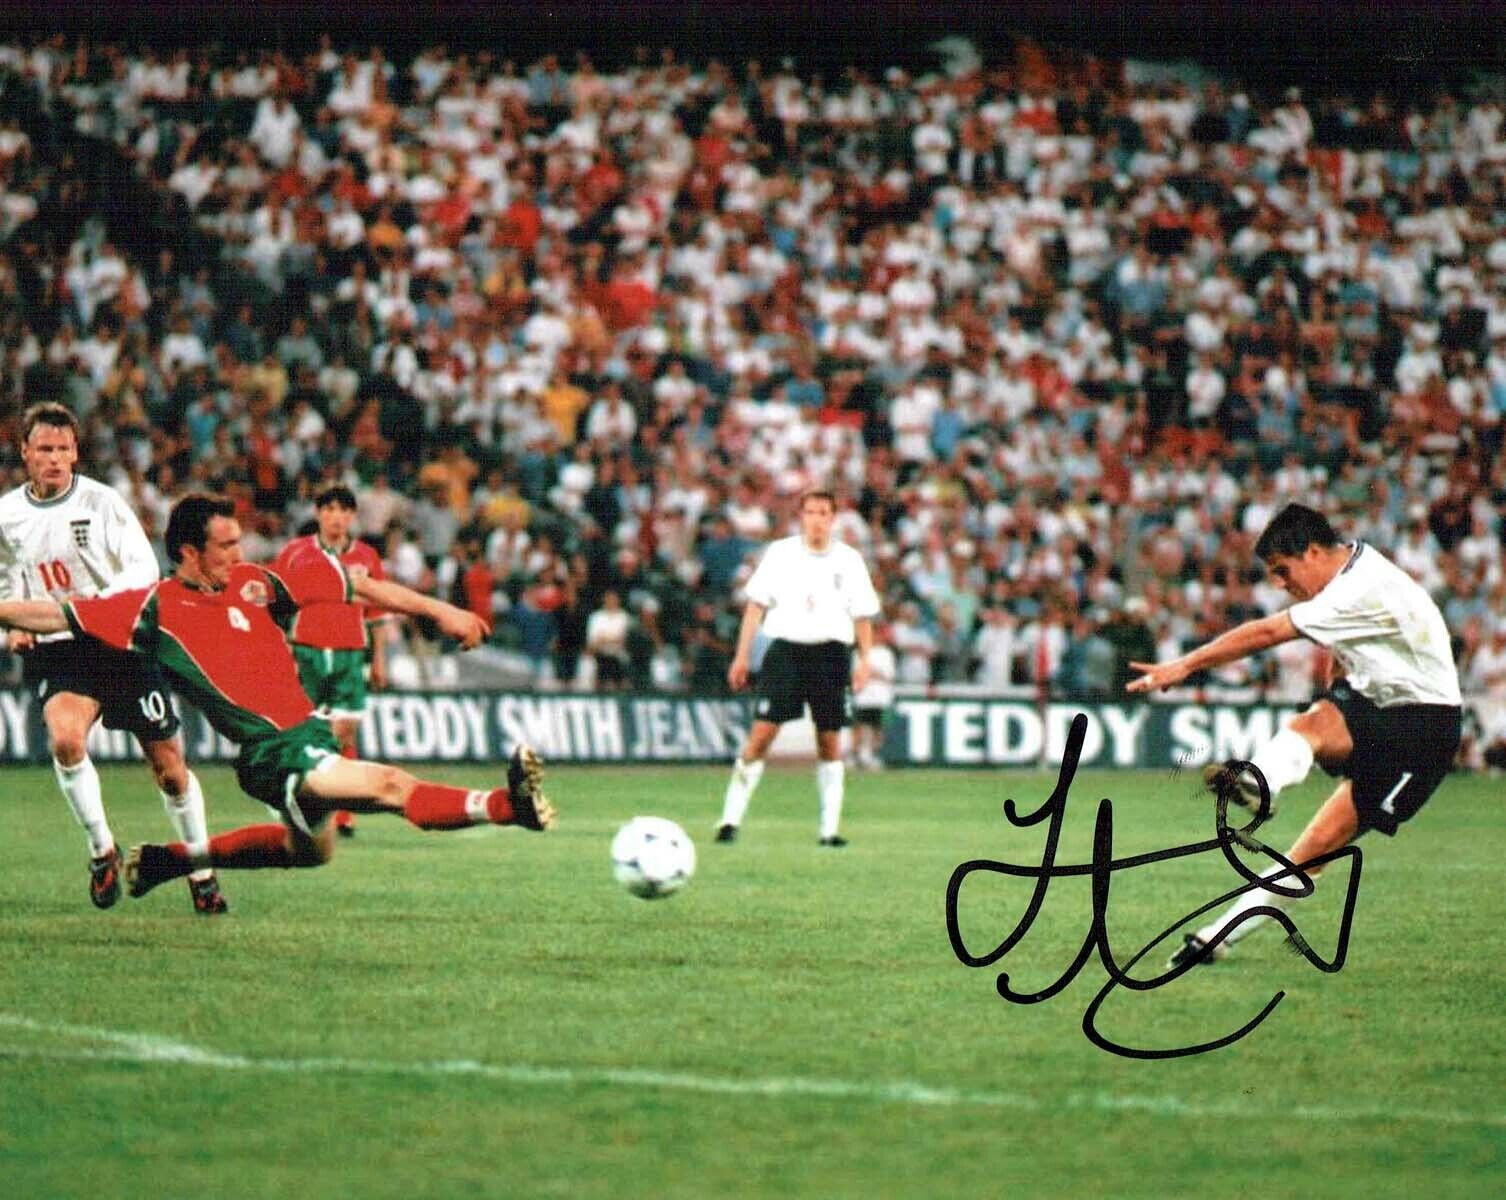 Jamie REDKNAPP SIGNED Autograph 10x8 Photo Poster painting AFTAL COA England Football Great